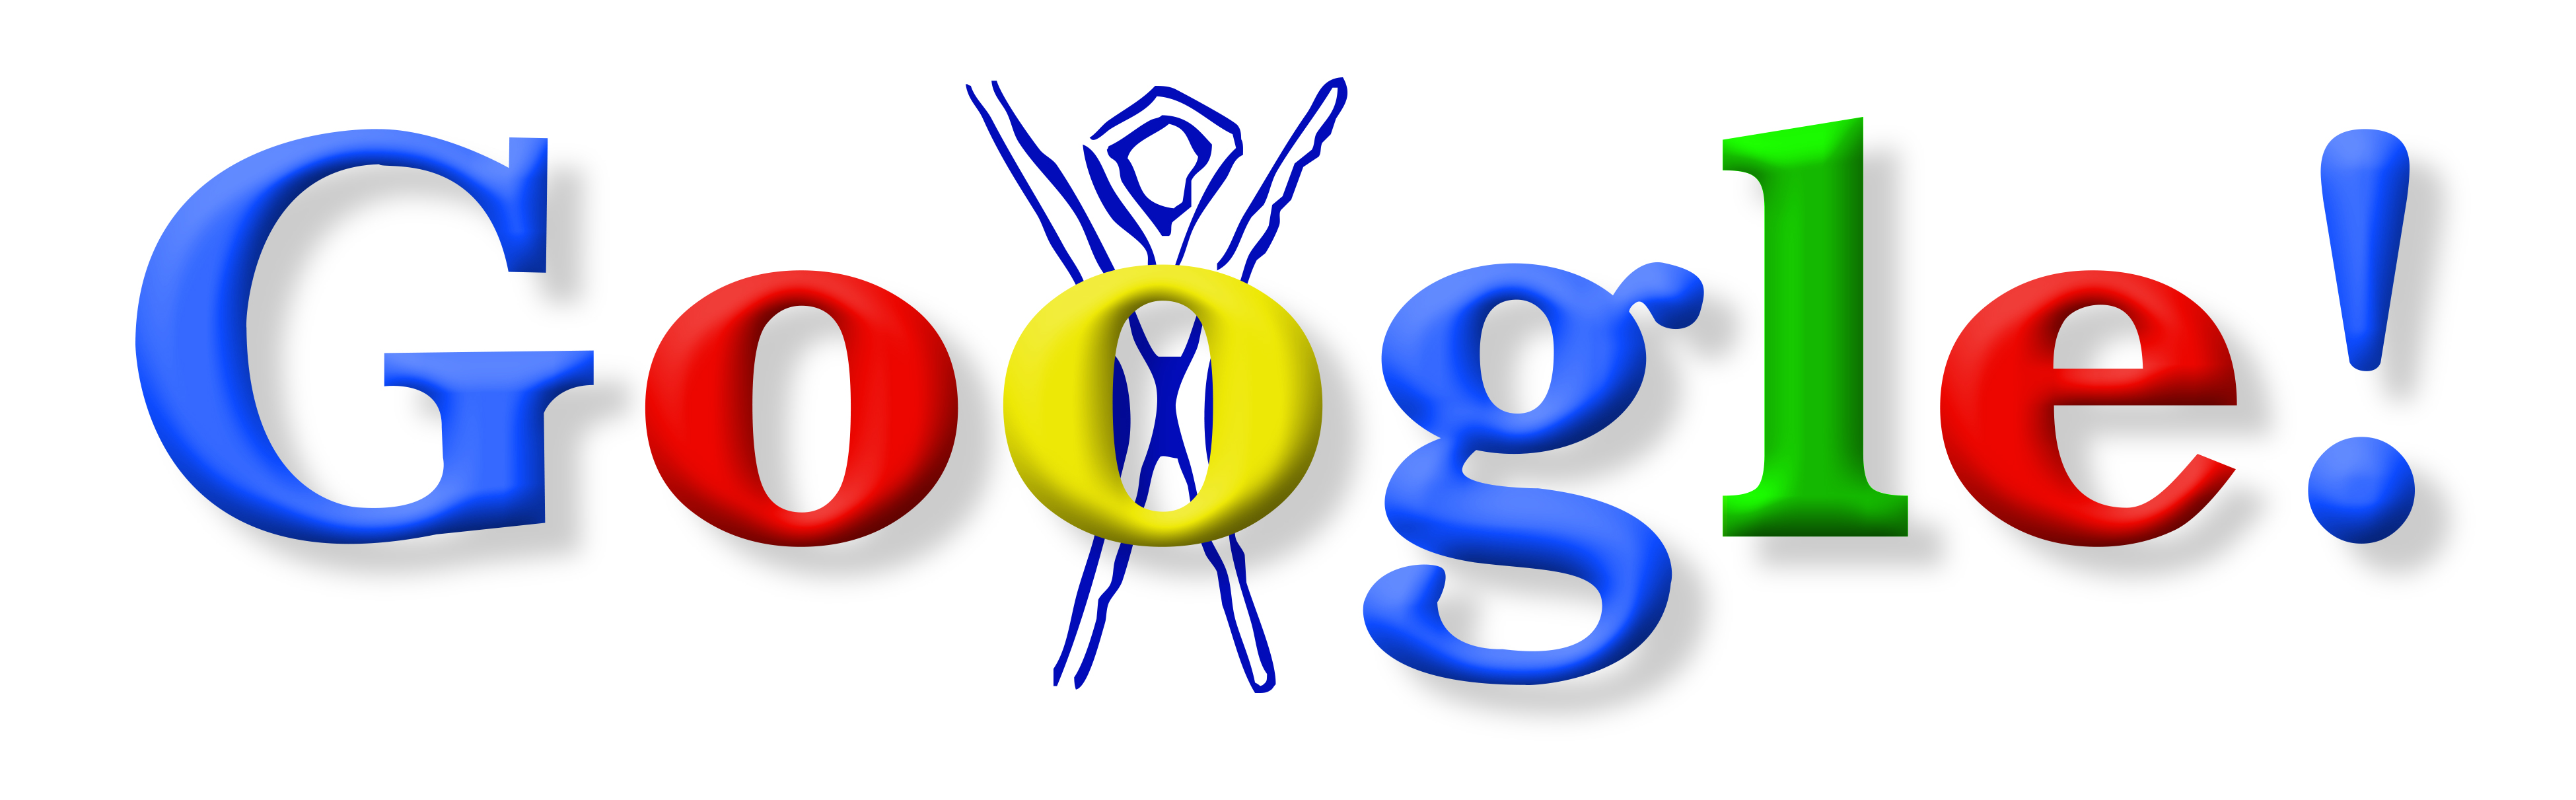 What was the first Google Doodle Games?